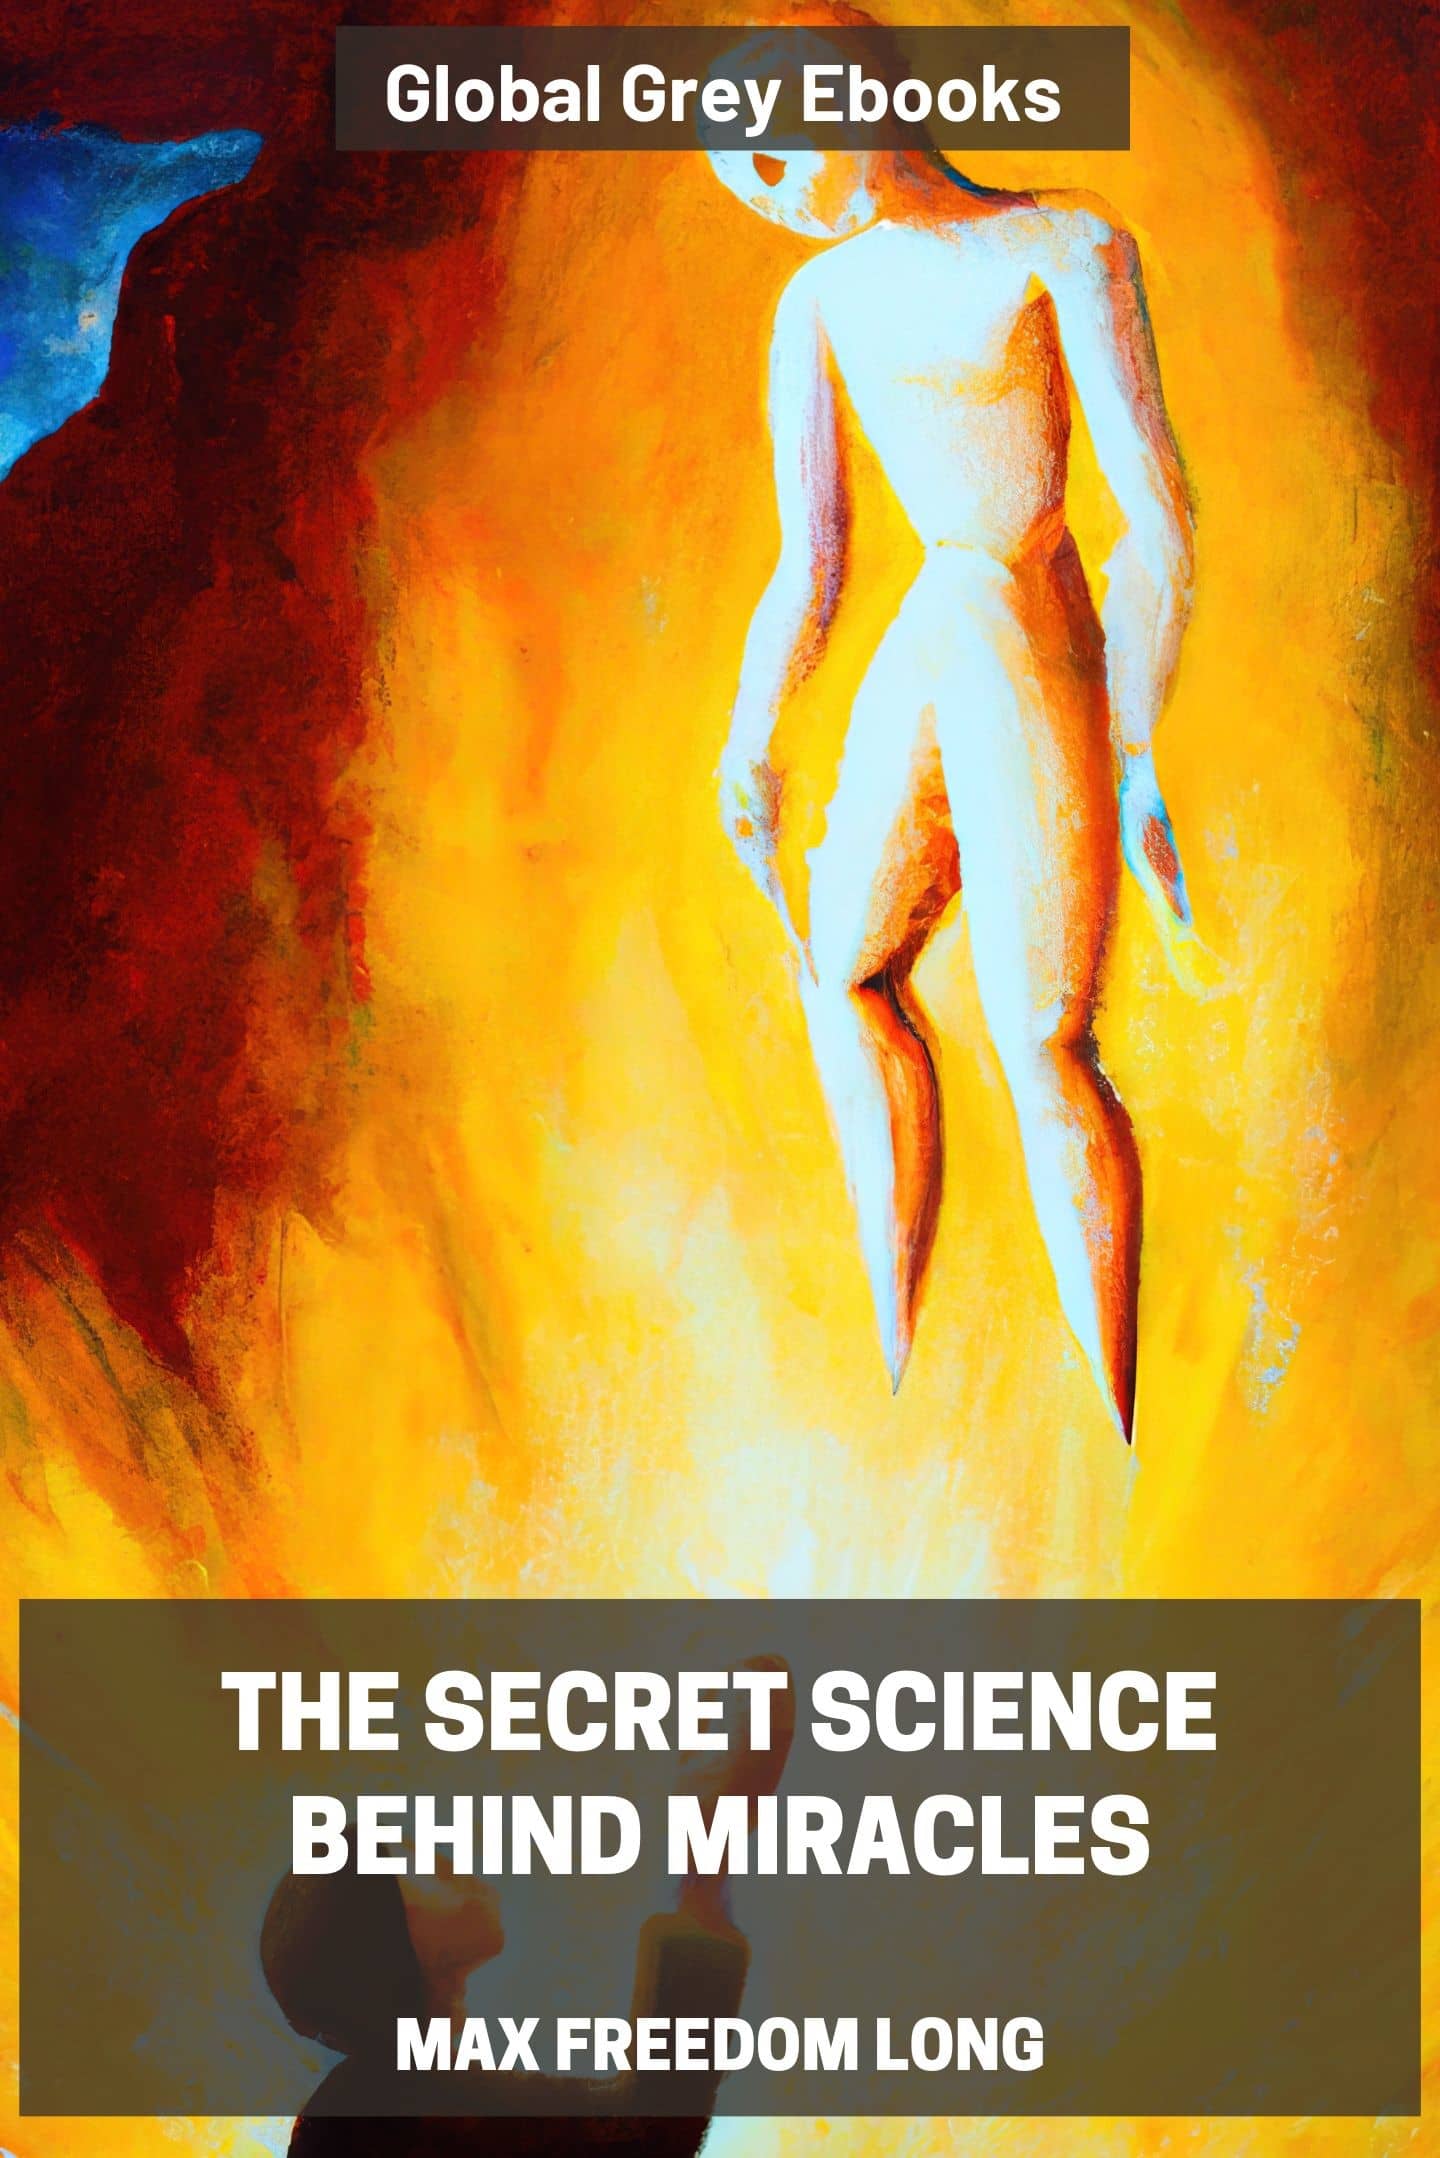 https://www.globalgreyebooks.com/content/book-covers/max-freedom-long_secret-science-behind-miracles-large.jpg